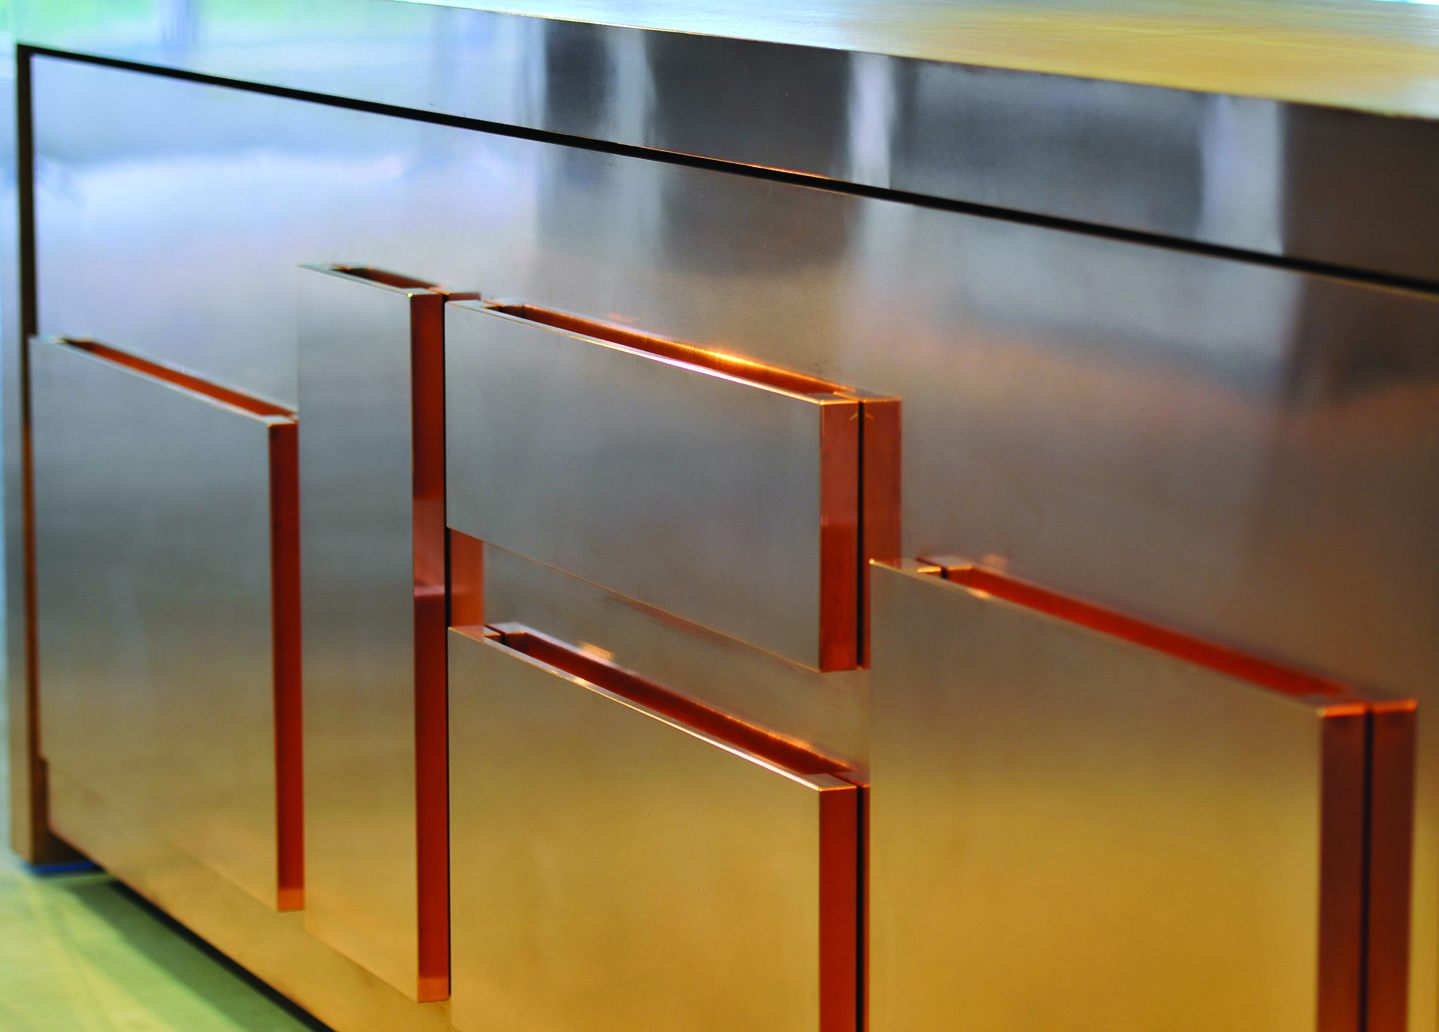 Strato_design_SEMPLICE#1_kitchen island with turning table in Hong Kong_copper mat finishing_01